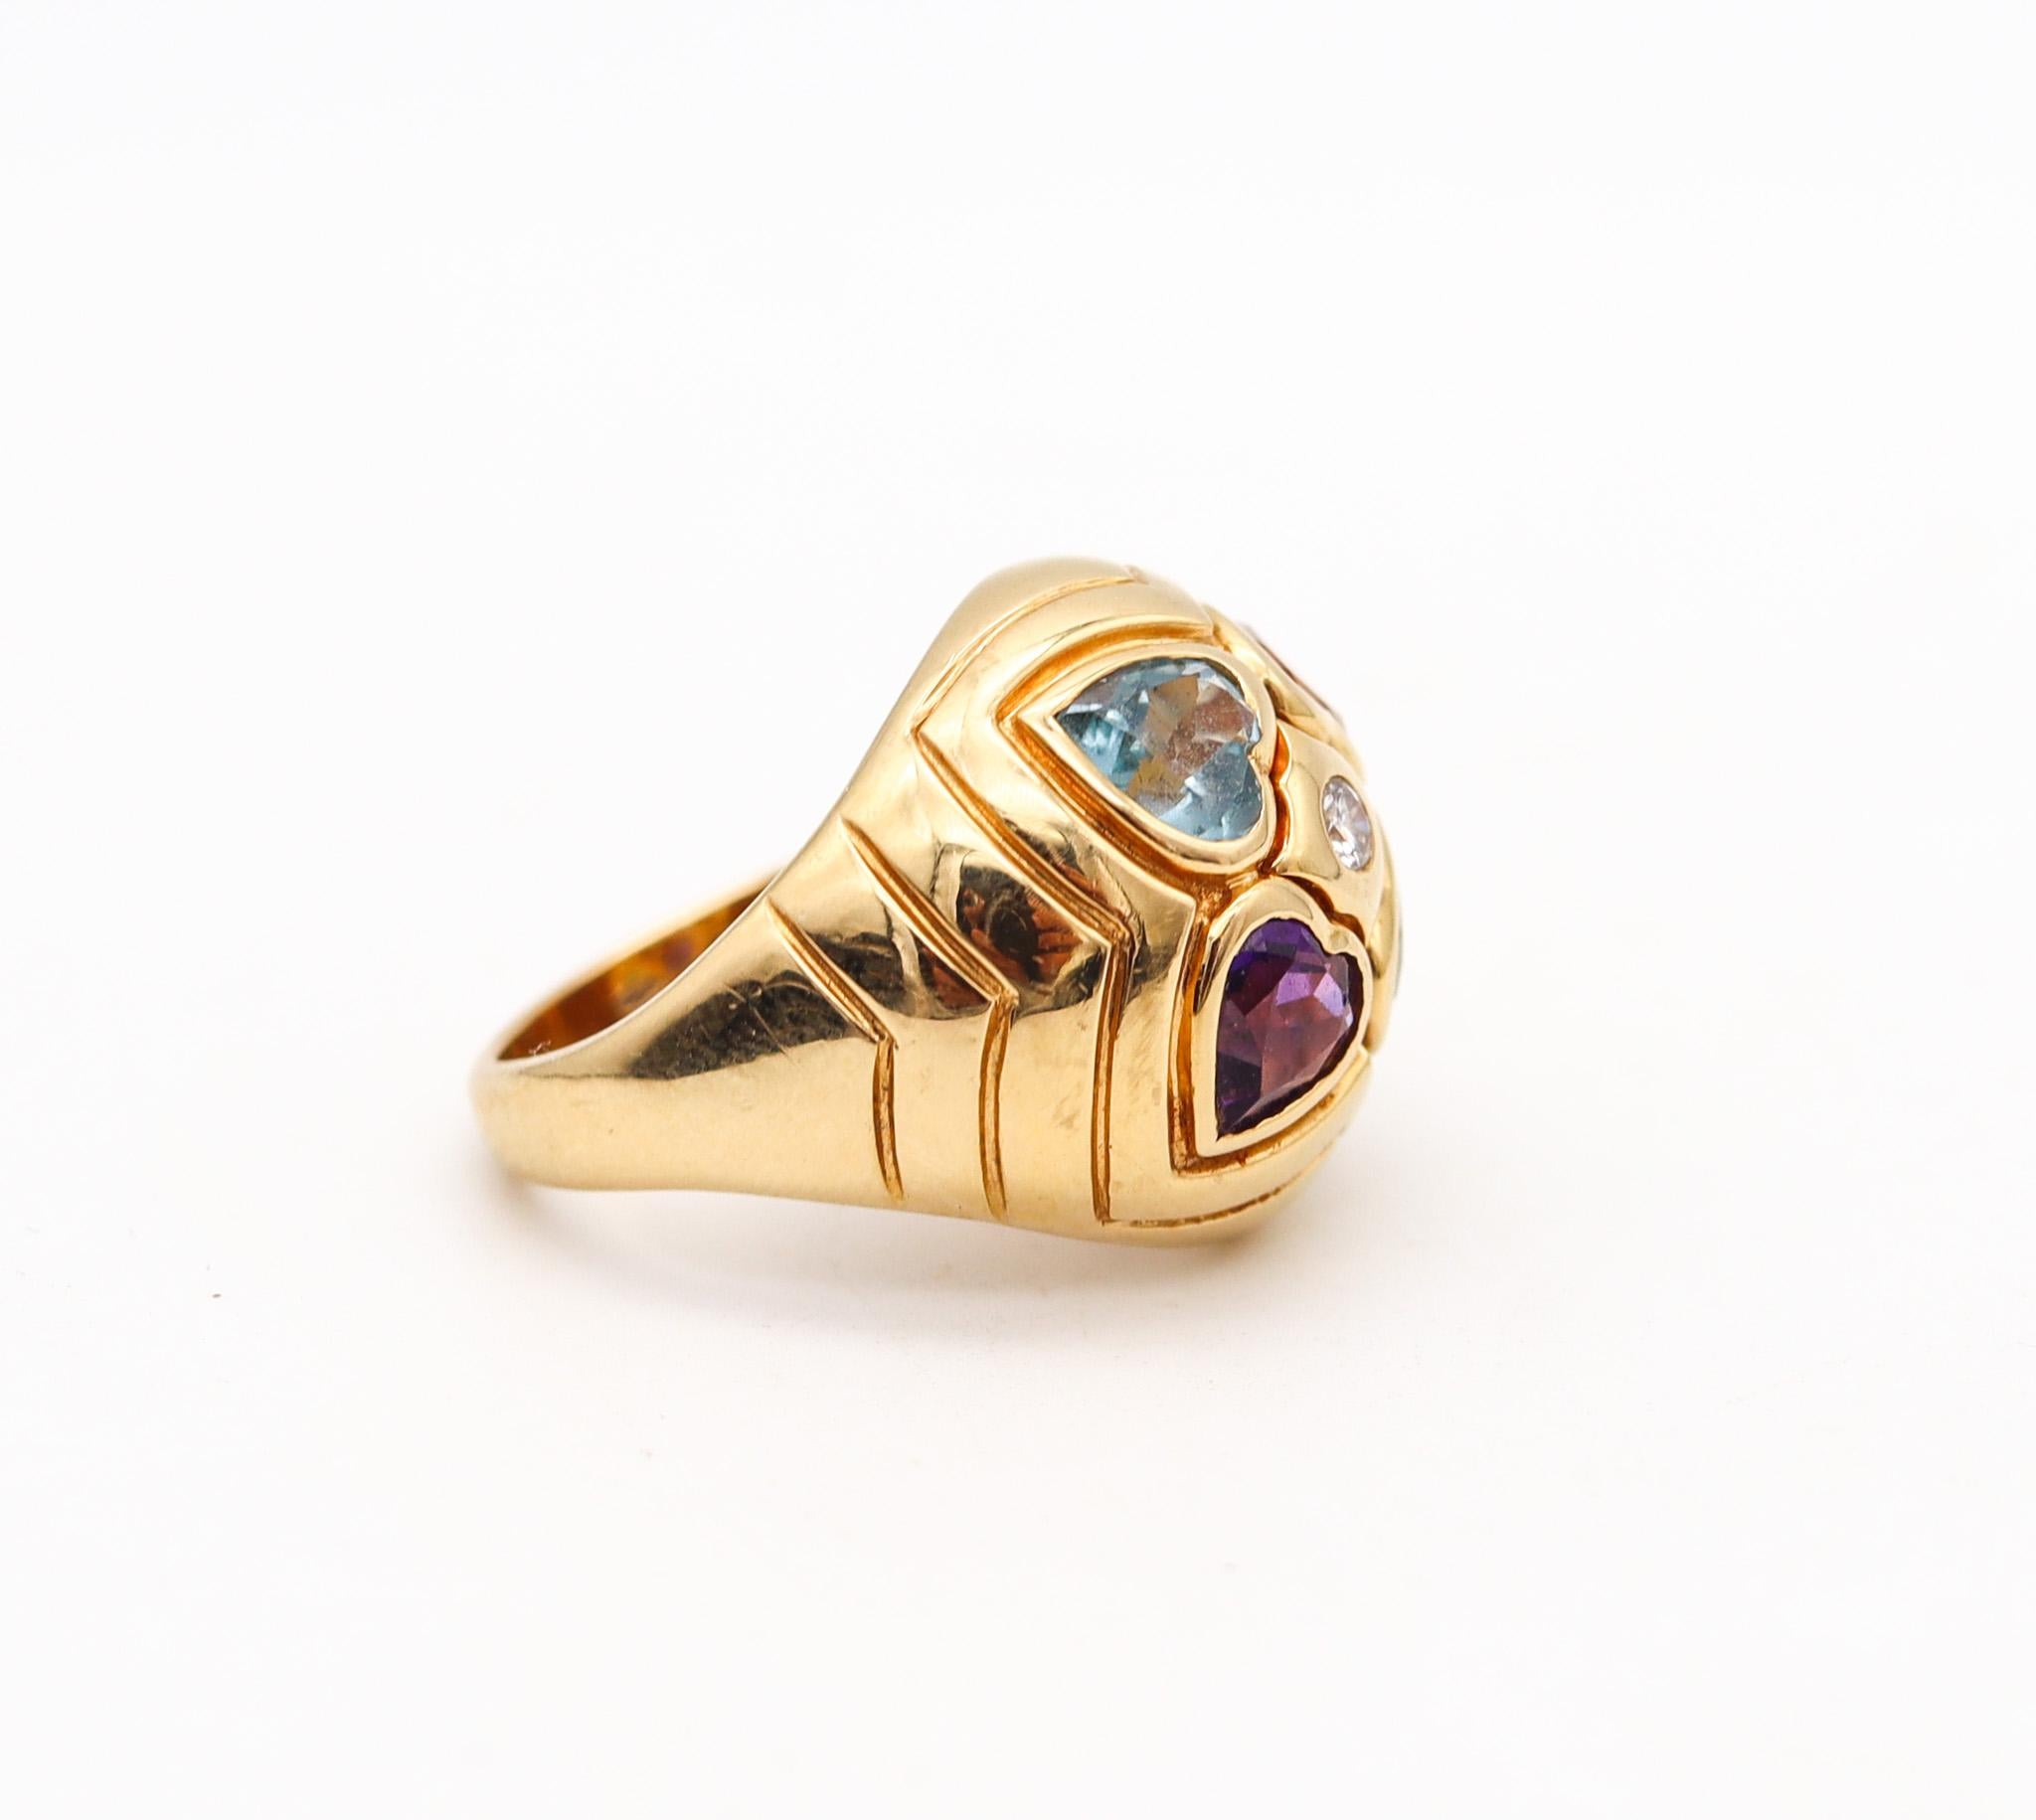 Modernist Bvlgari Roma Bombe Cocktail Ring In 18Kt Gold With 6.10 Ctw In Color Gemstones For Sale